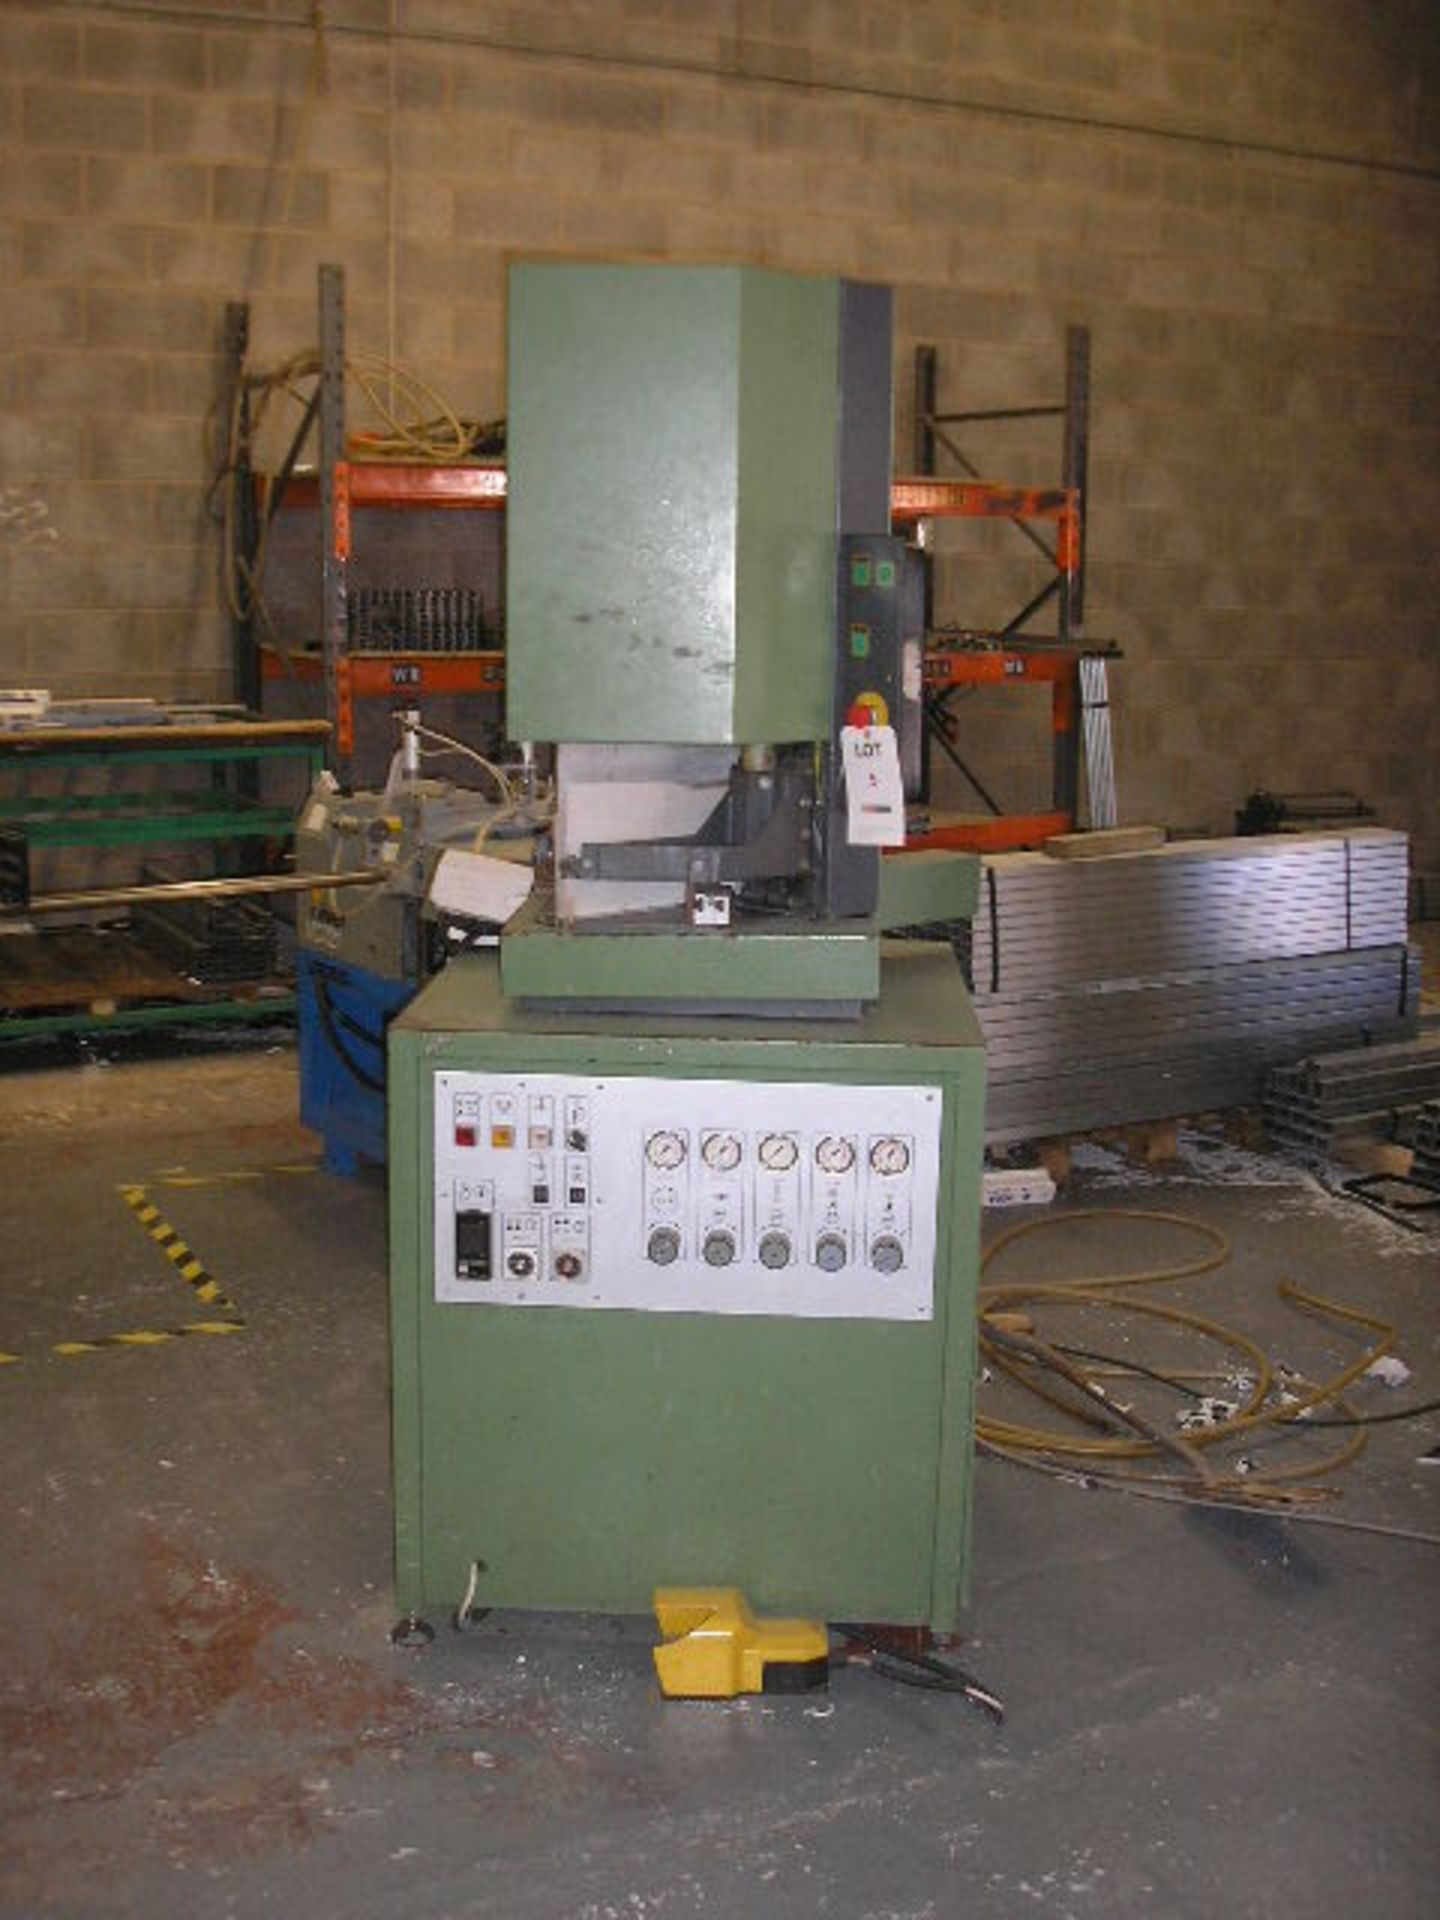 Someco Unival 510NLV single head welder, S/No. 56490602, Date 2002 - Image 2 of 3